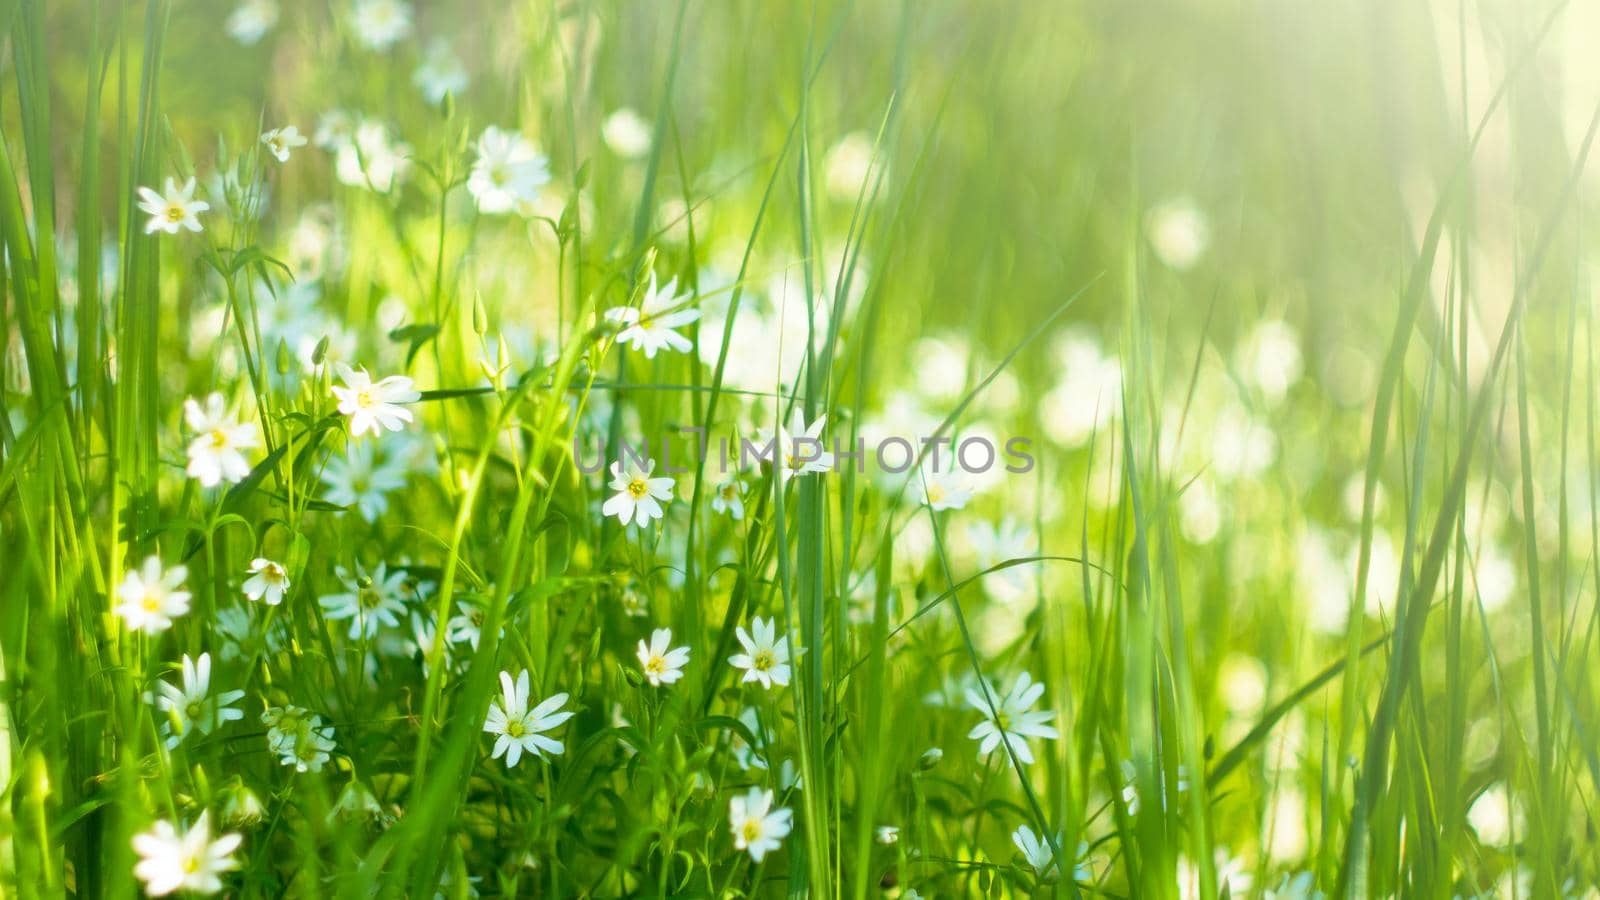 Meadow with meadow grasses and delicate white little flowers in the sunlight on a summer day. by NataBene